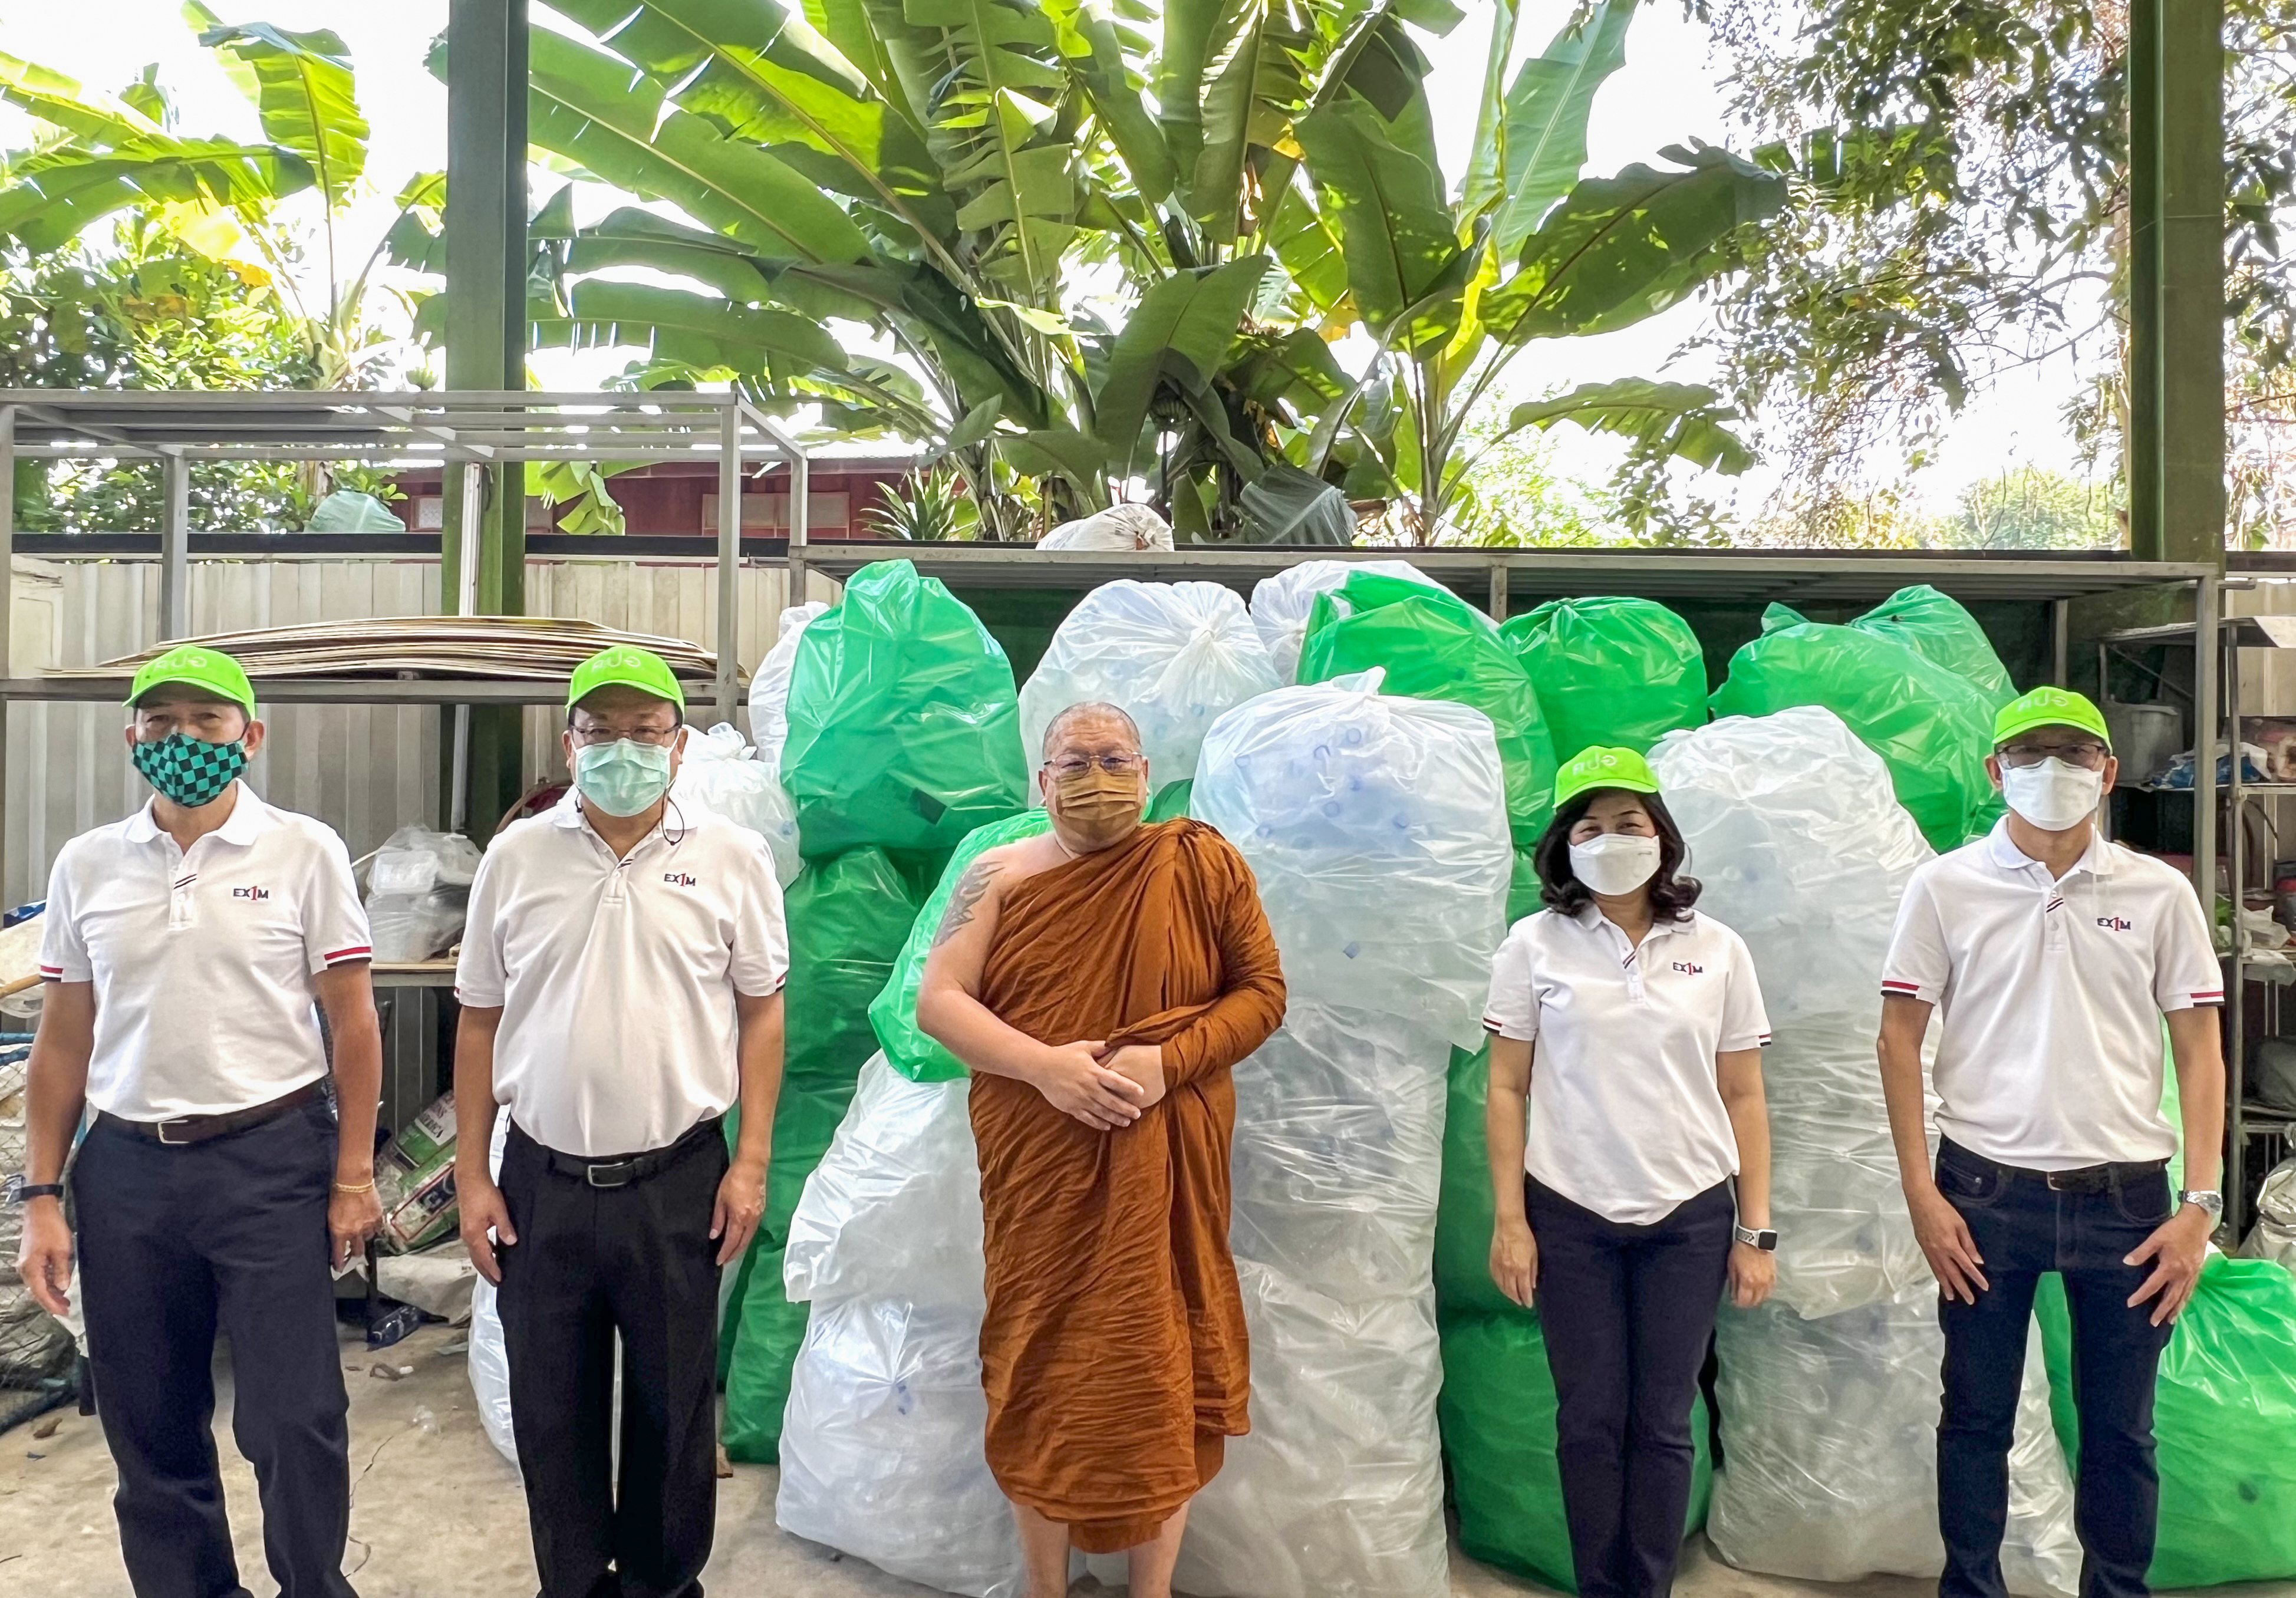 EXIM Thailand Delivers Used Plastic Bottles to Chak Daeng Temple in Samut Prakan  For the Recycling Process and Buddhist Monk’s Robe Making